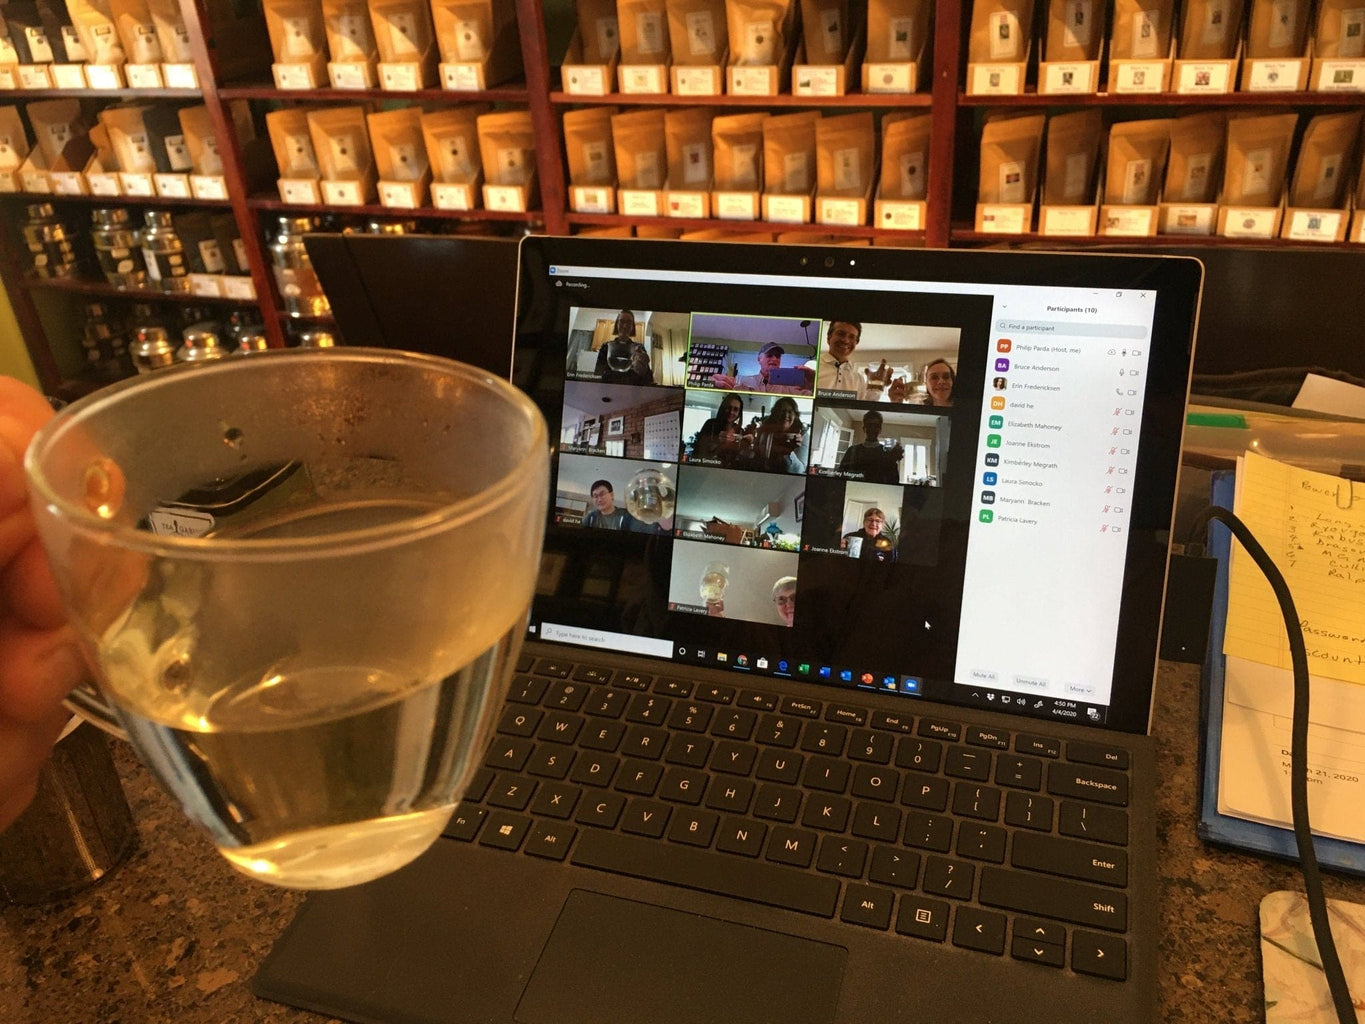 Private Virtual Tea Tastings...Learn about how tea can improve your health and quality of life, right at home...Now with family/friends! - Drink Great Tea